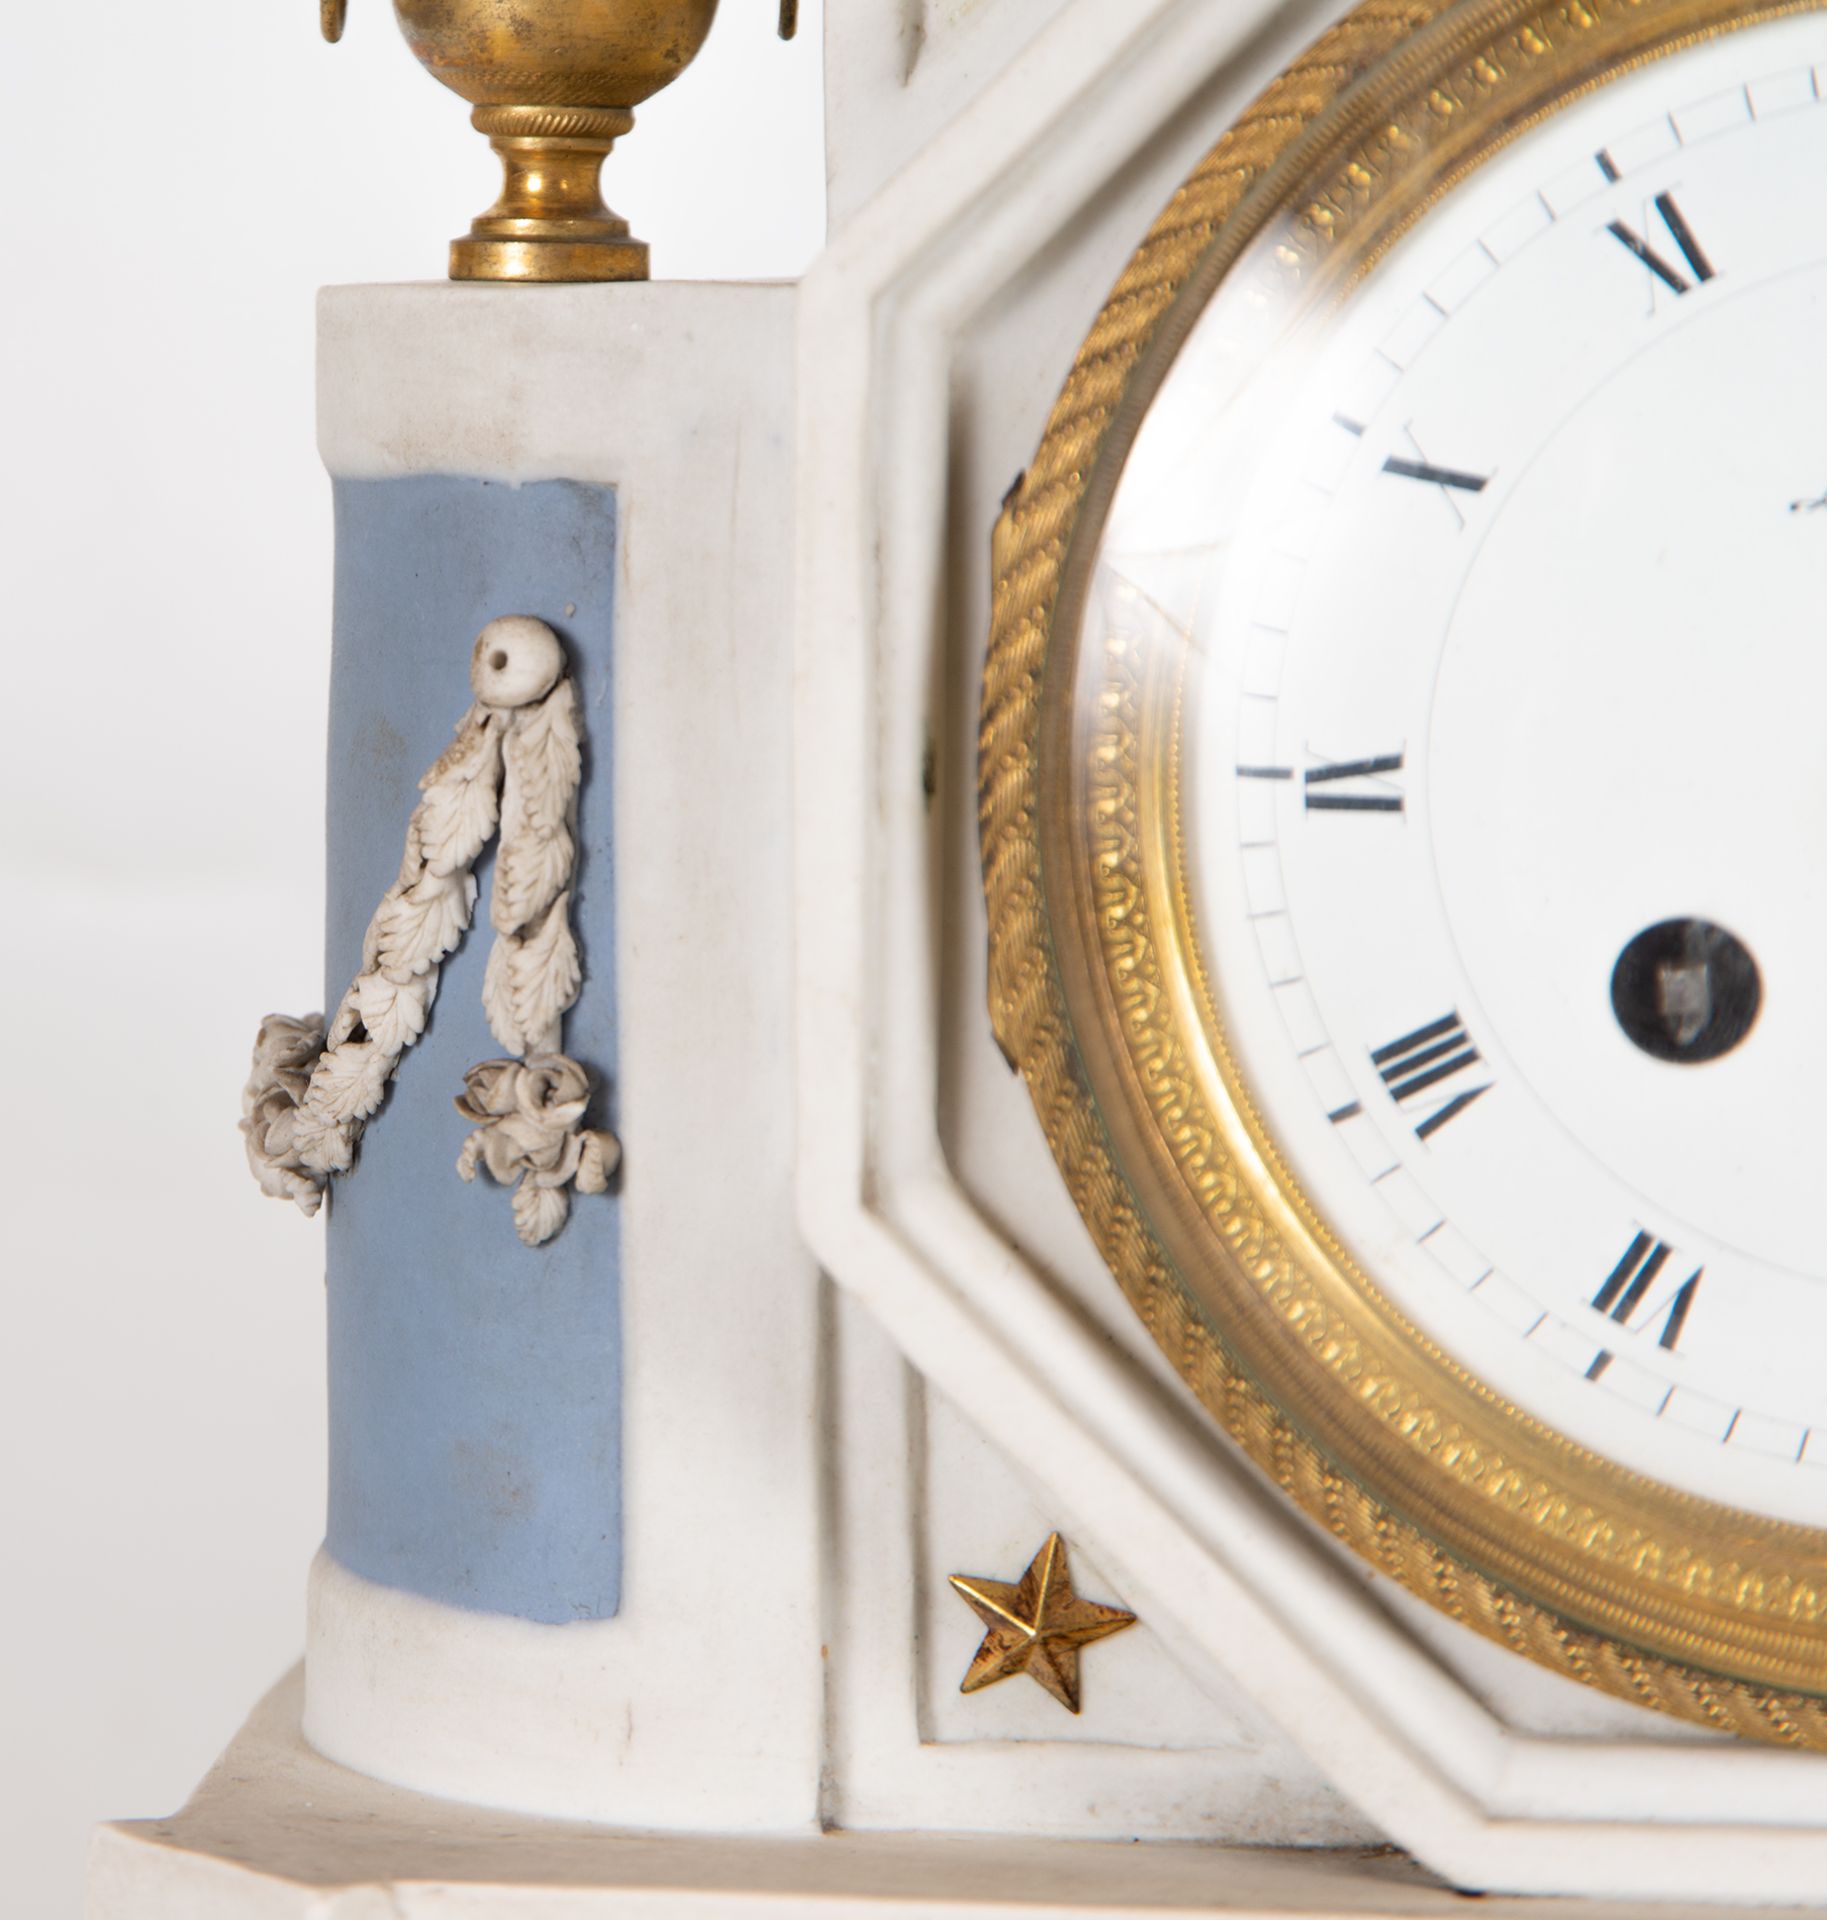 Empire Style Clock in Wedgwood porcelain and gilt bronze, 19th century French school - Image 4 of 11